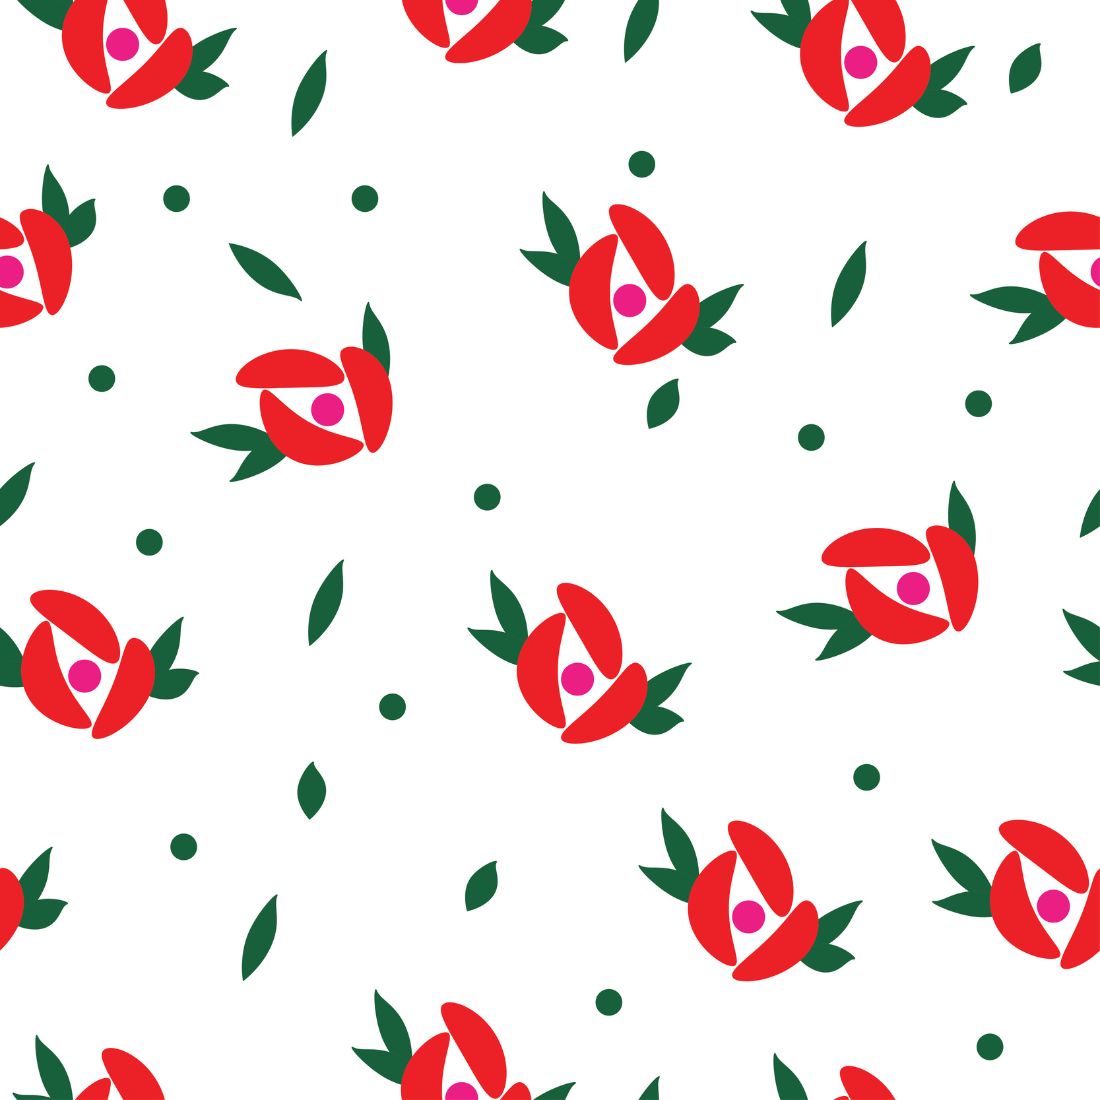 Seamless floral pattern preview image.